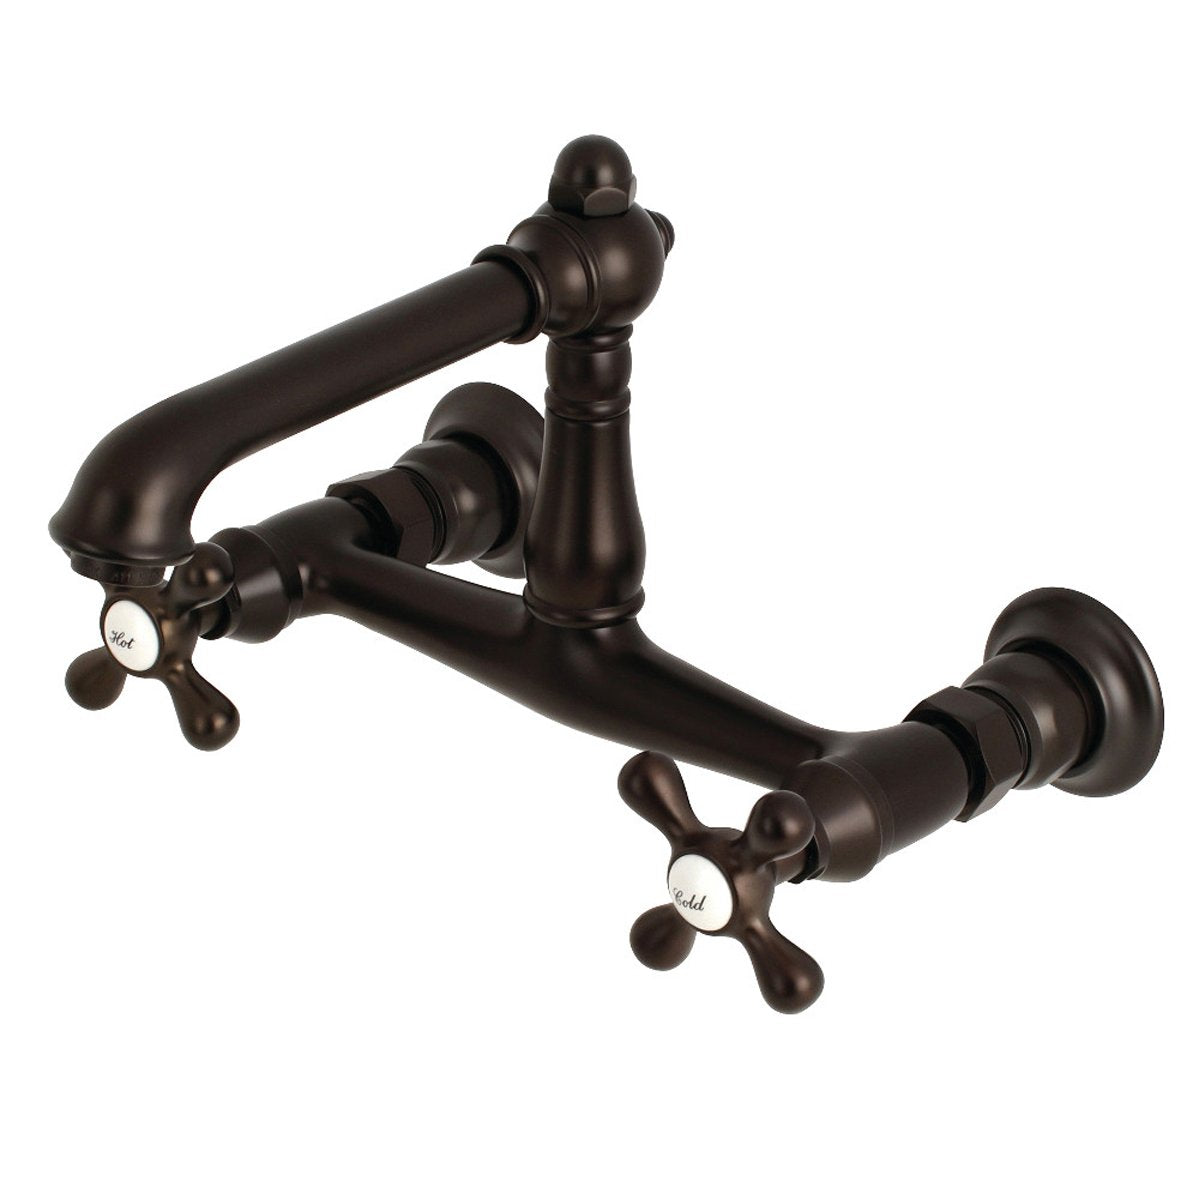 Kingston Brass English Country 8-Inch Center Wall Mount Bathroom Faucet